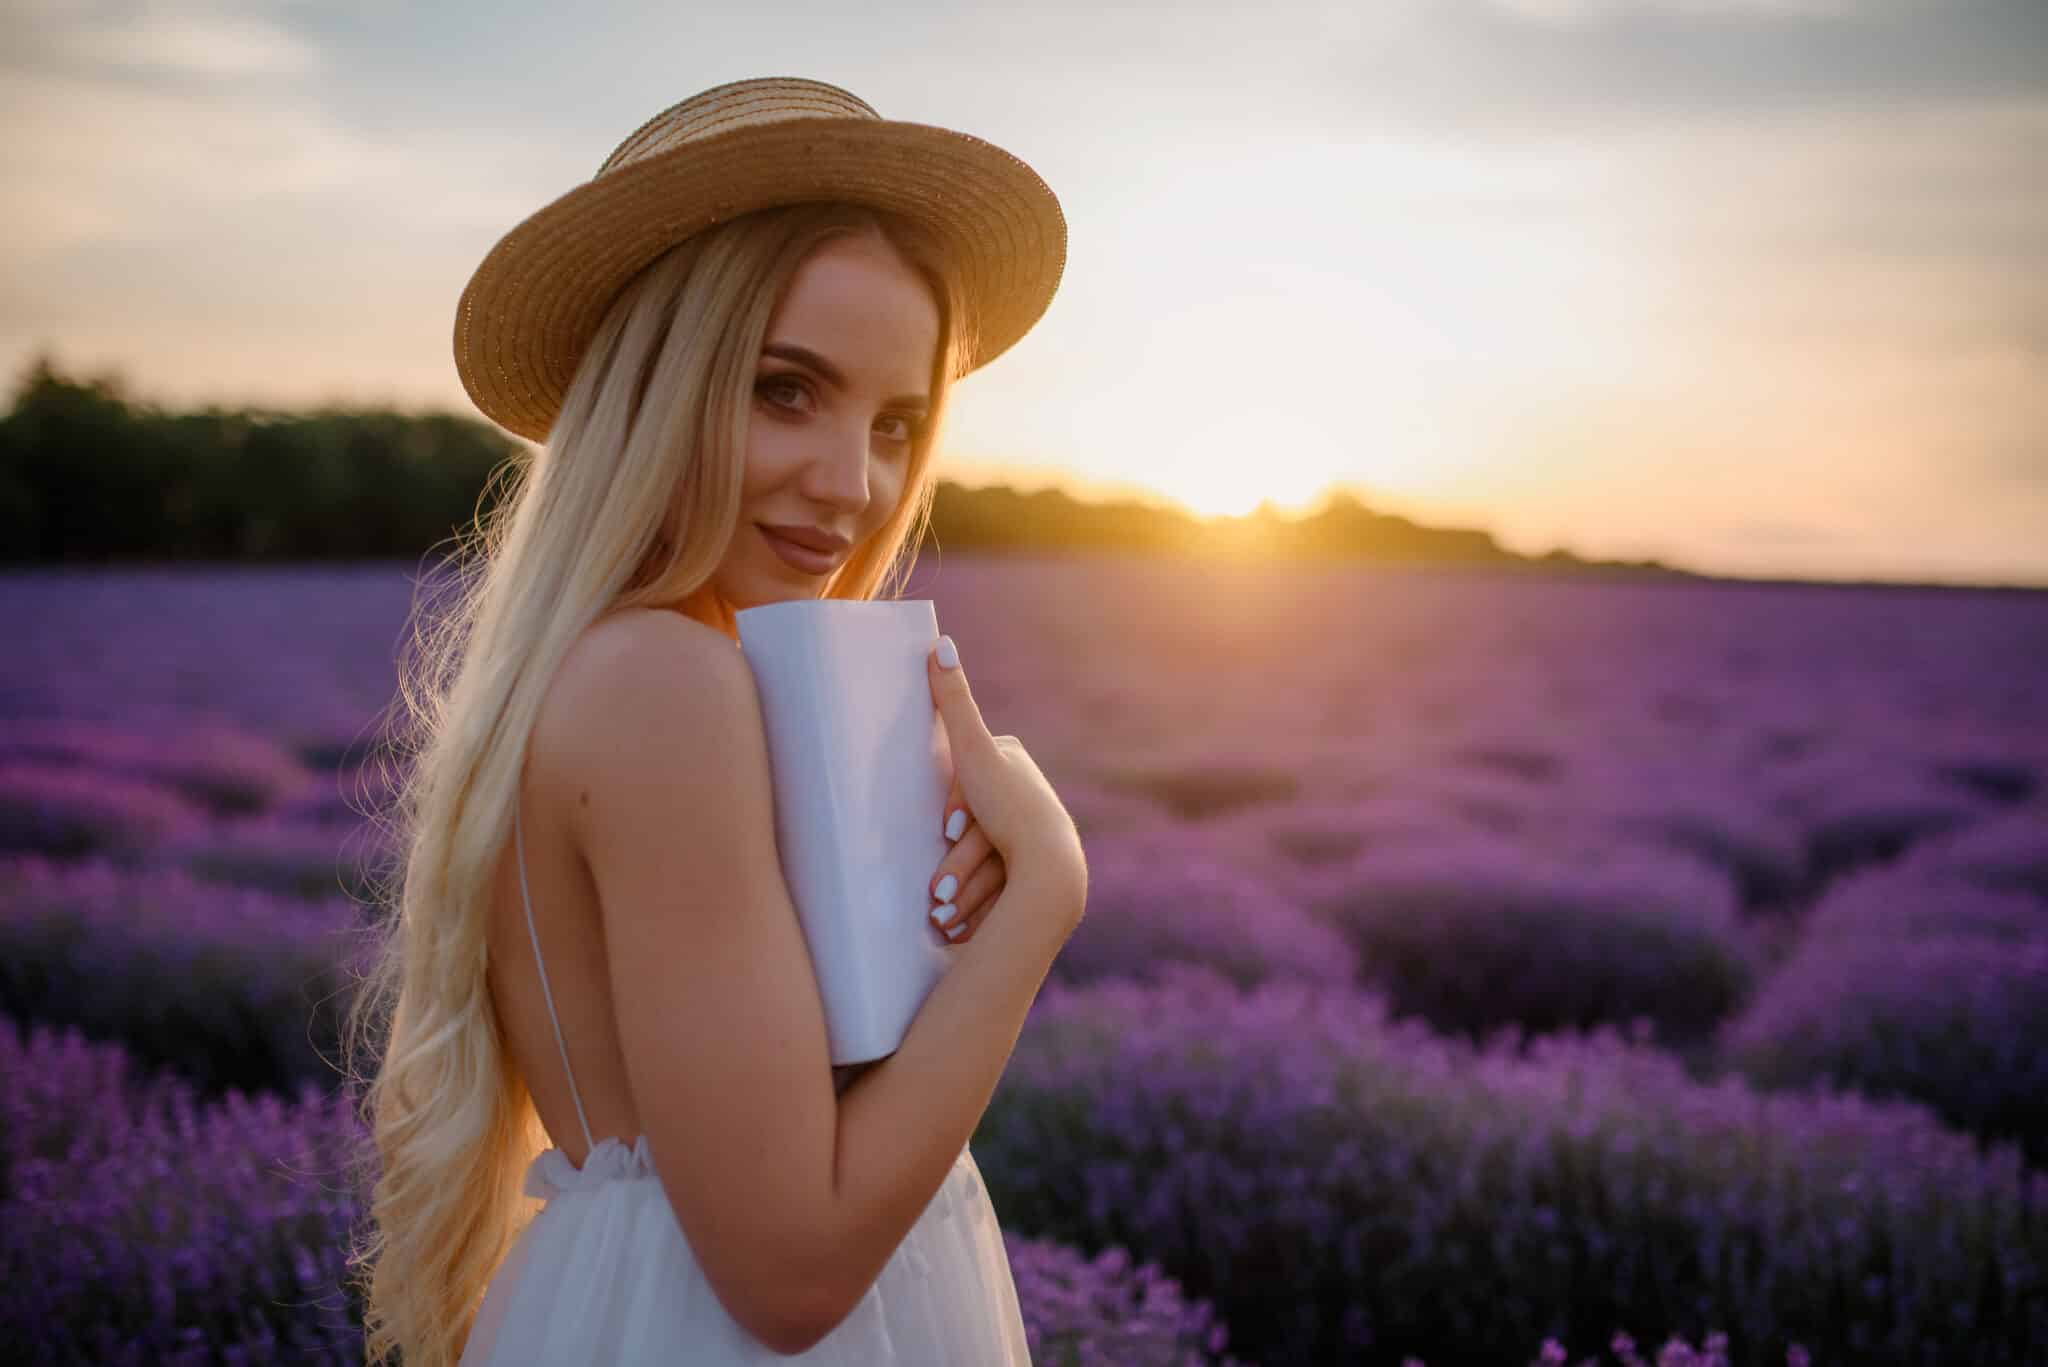 Young beautiful woman in white dress and hat is walking in a lavender field